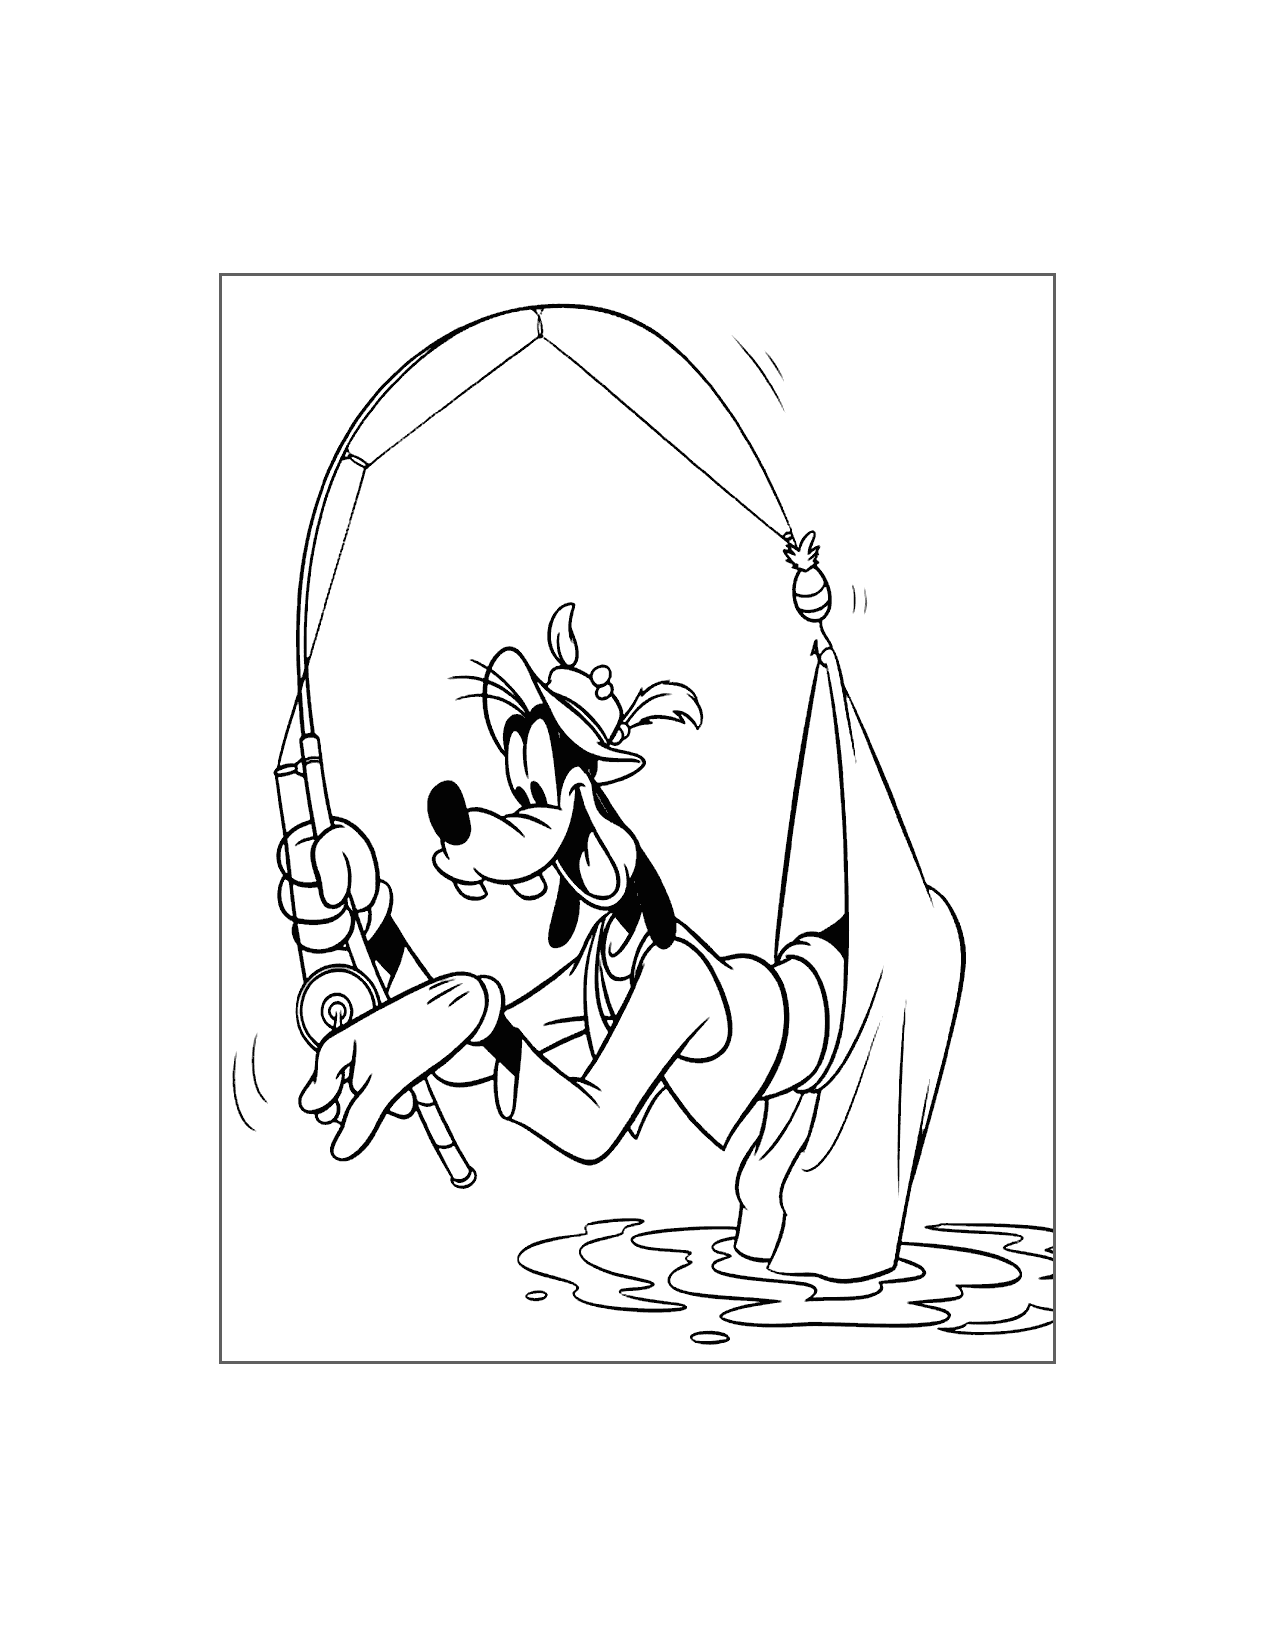 Goofy Catches Himself Coloring Page